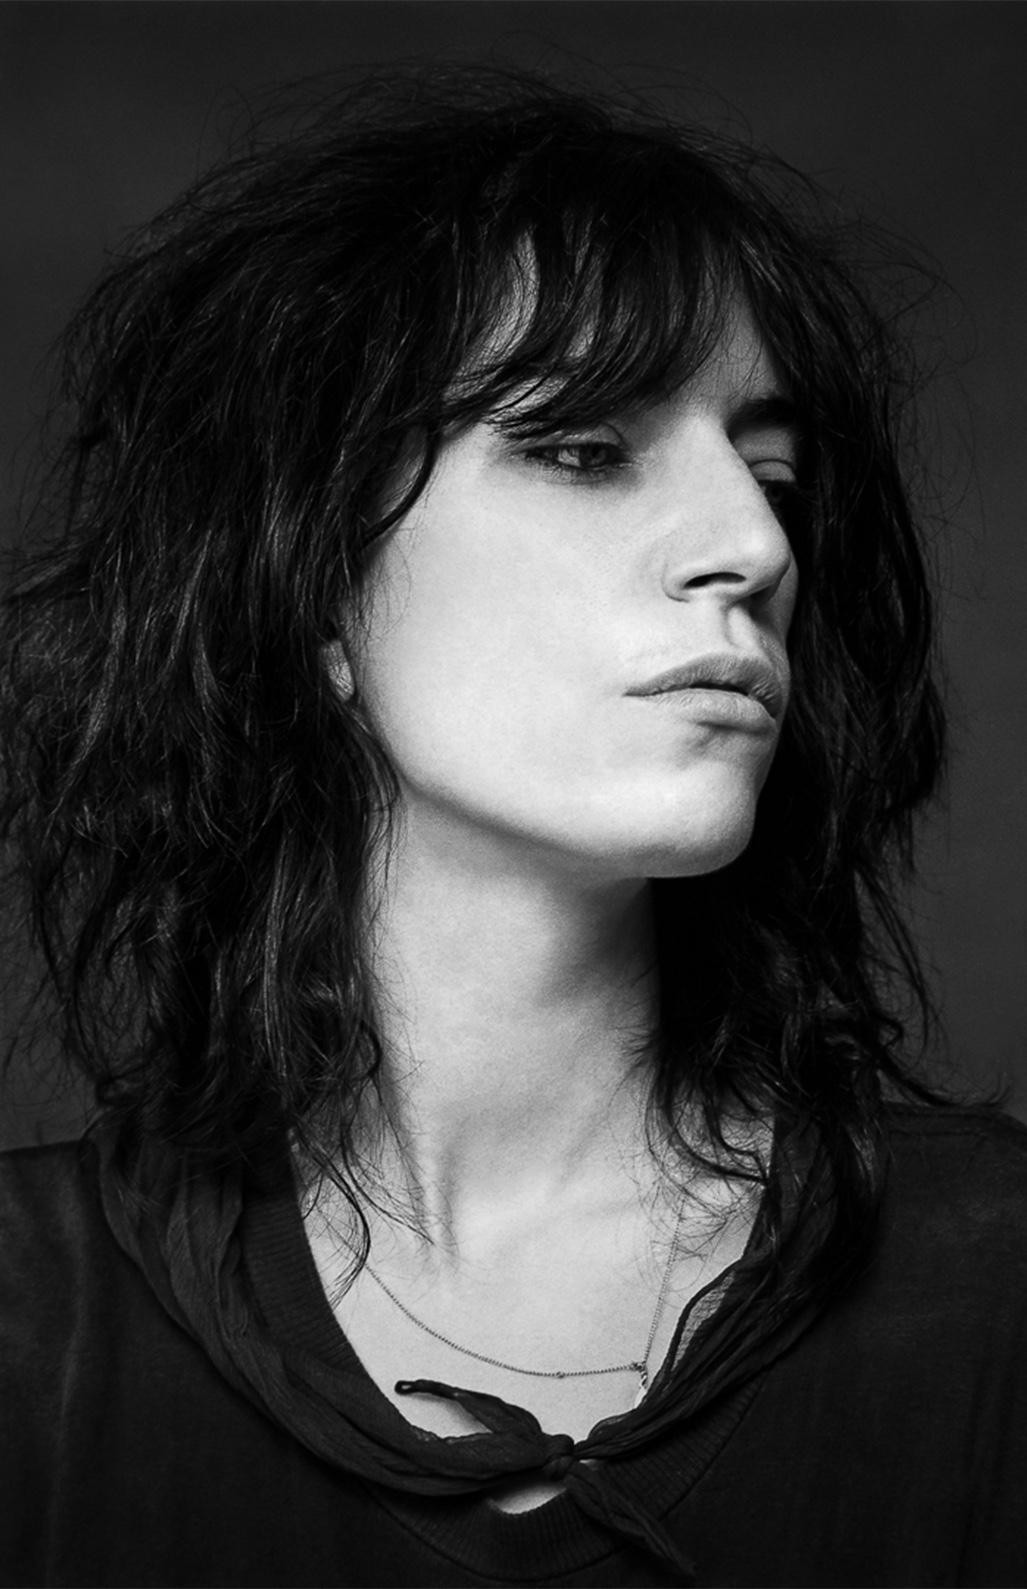 Signed limited edition 16x20"" print of Patti Smith taken in 1978 by Lynn Goldsmith.

Limited edition number 3/20

Modern C-type print. Available for immediate shipping.

Lynn Goldsmith has documented over five decades of American culture, capturing